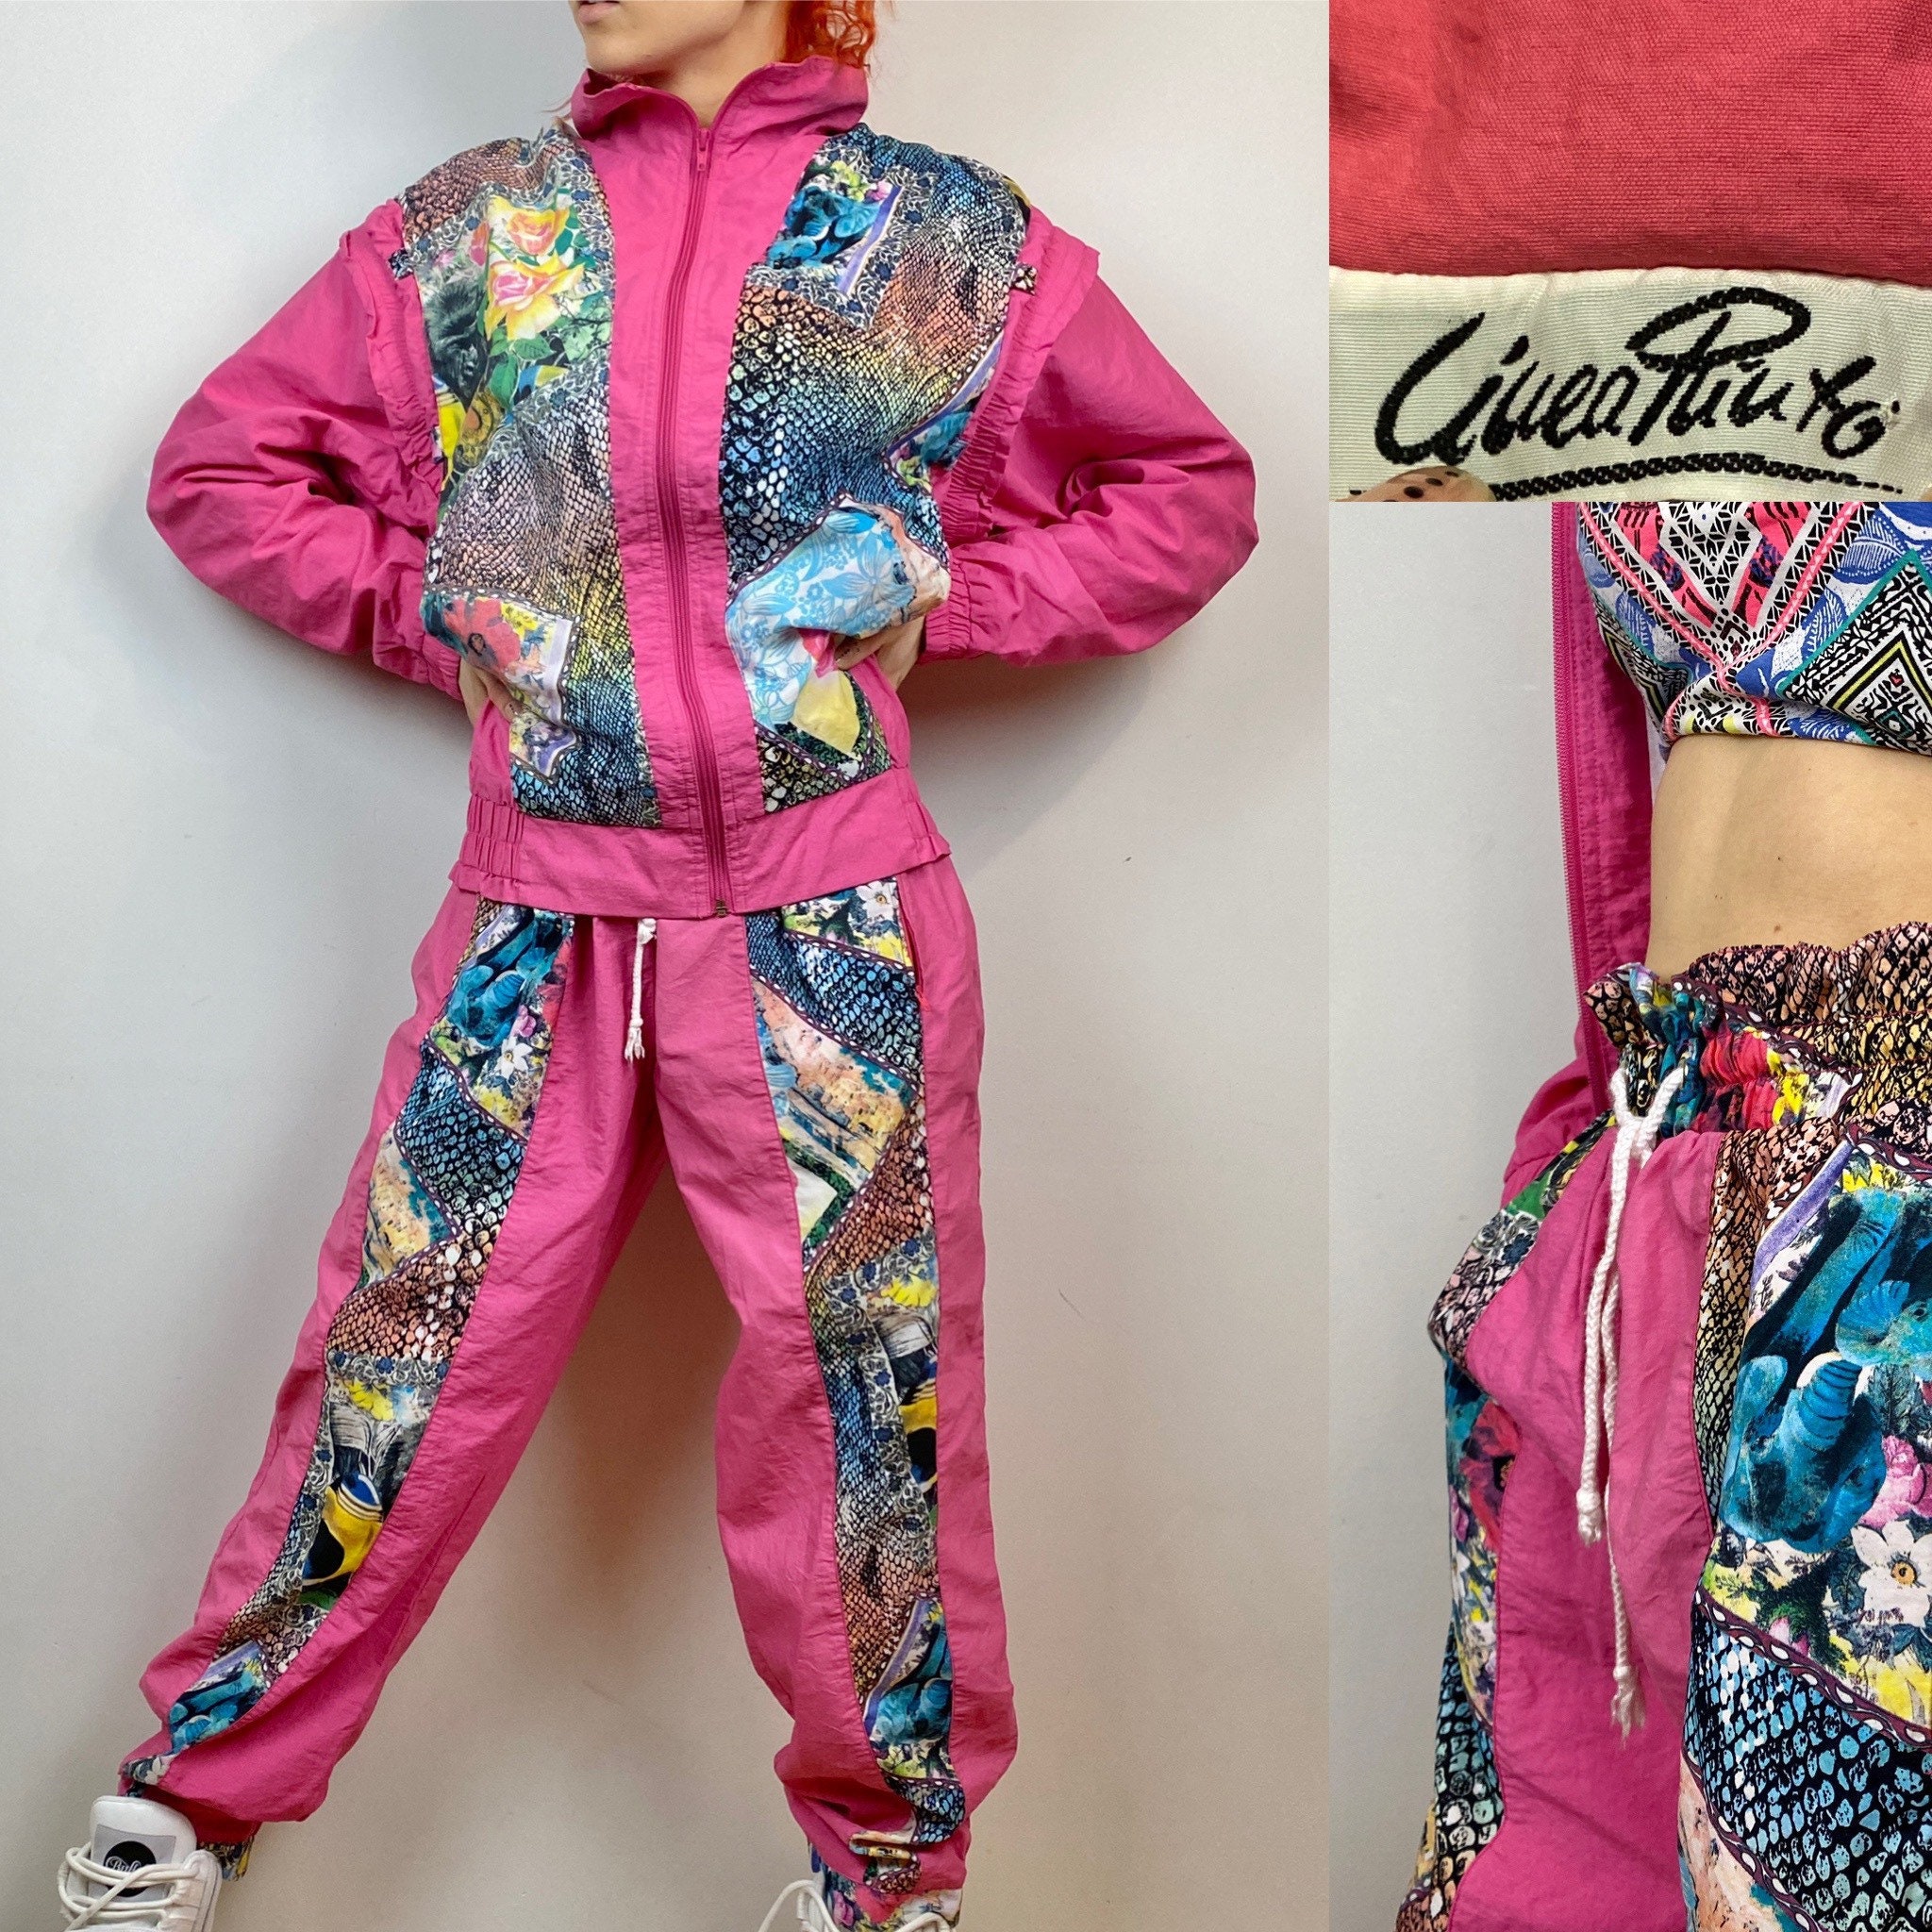 Colourful Tracksuit Set Vintage 80s, Ruffled Detailed Abstract Pink Bright,  Pants and Jacket, Gymnastics, High Waist, Sexy, Size S/M -  Canada